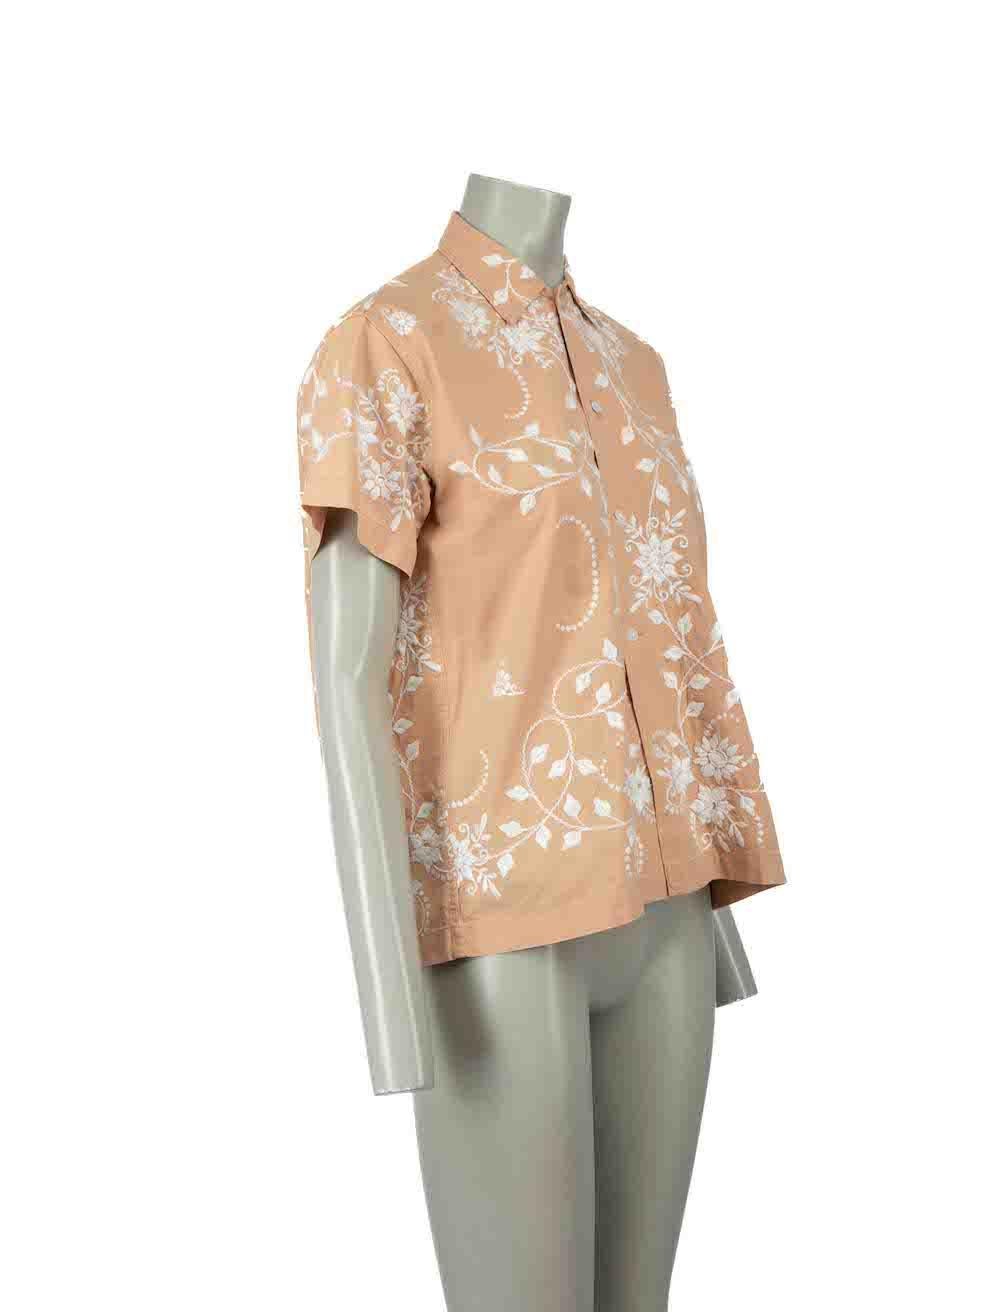 CONDITION is Very good. Minimal wear to shirt is evident. Minimal satin mark to front hemline on this used Bode designer resale item.
 
Details
Beige
Cotton
Shirt
White floral embroidery
Short sleeves
Round neck
Button up fastening
 
Made in India
